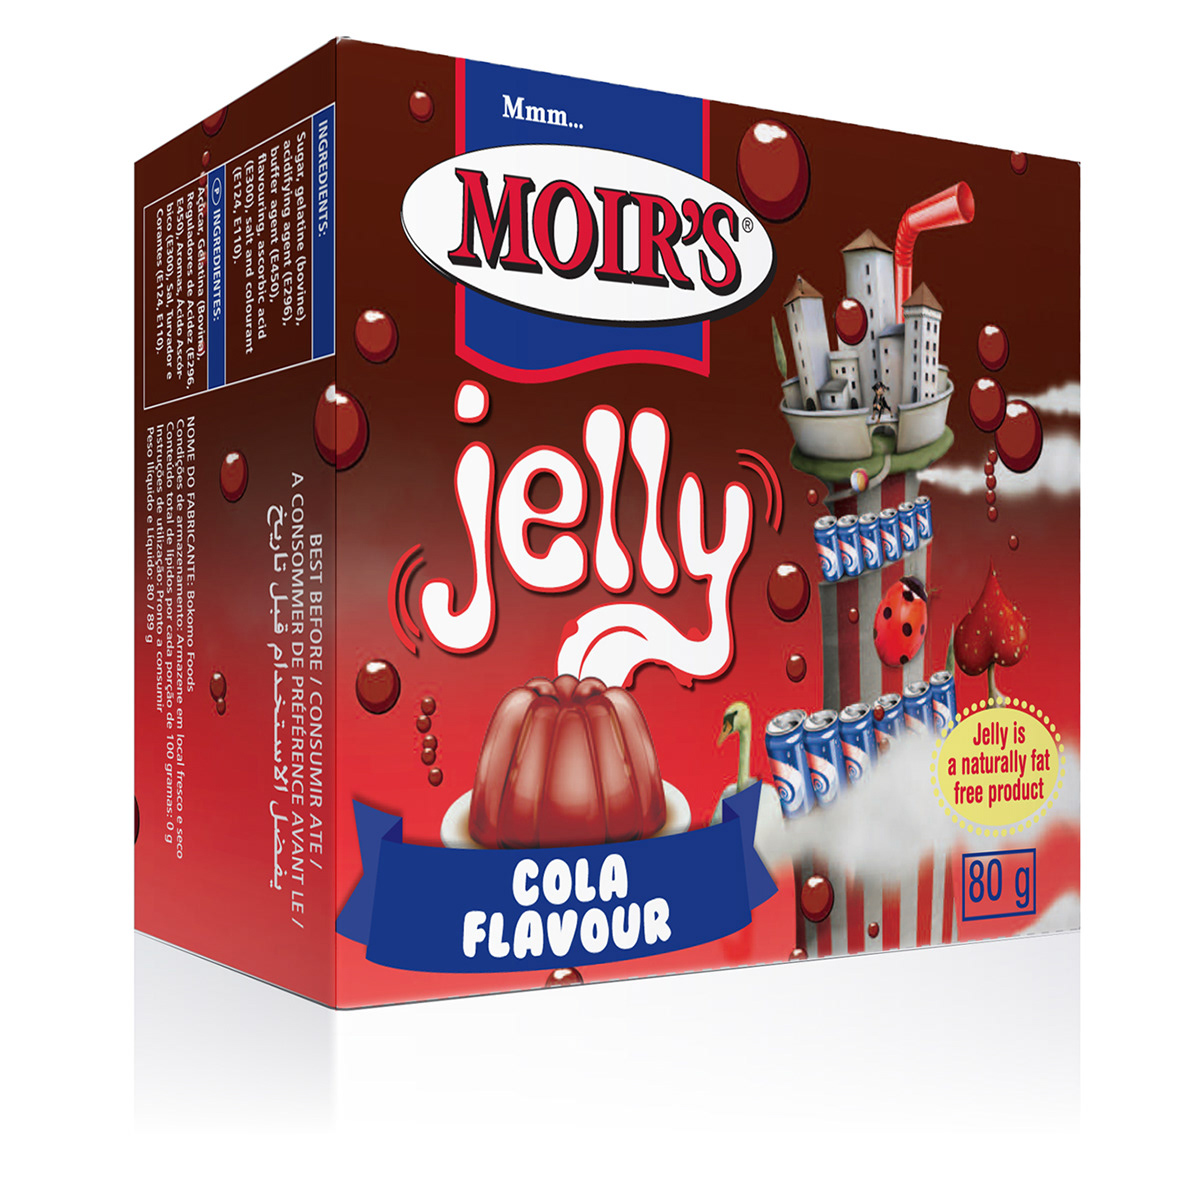 jelly  wobbly  fun  bubblegum  Marshmallow candy floss dragon fruit fantasy  Cola  fun magical  jello moir's Playful whimsical flavoured